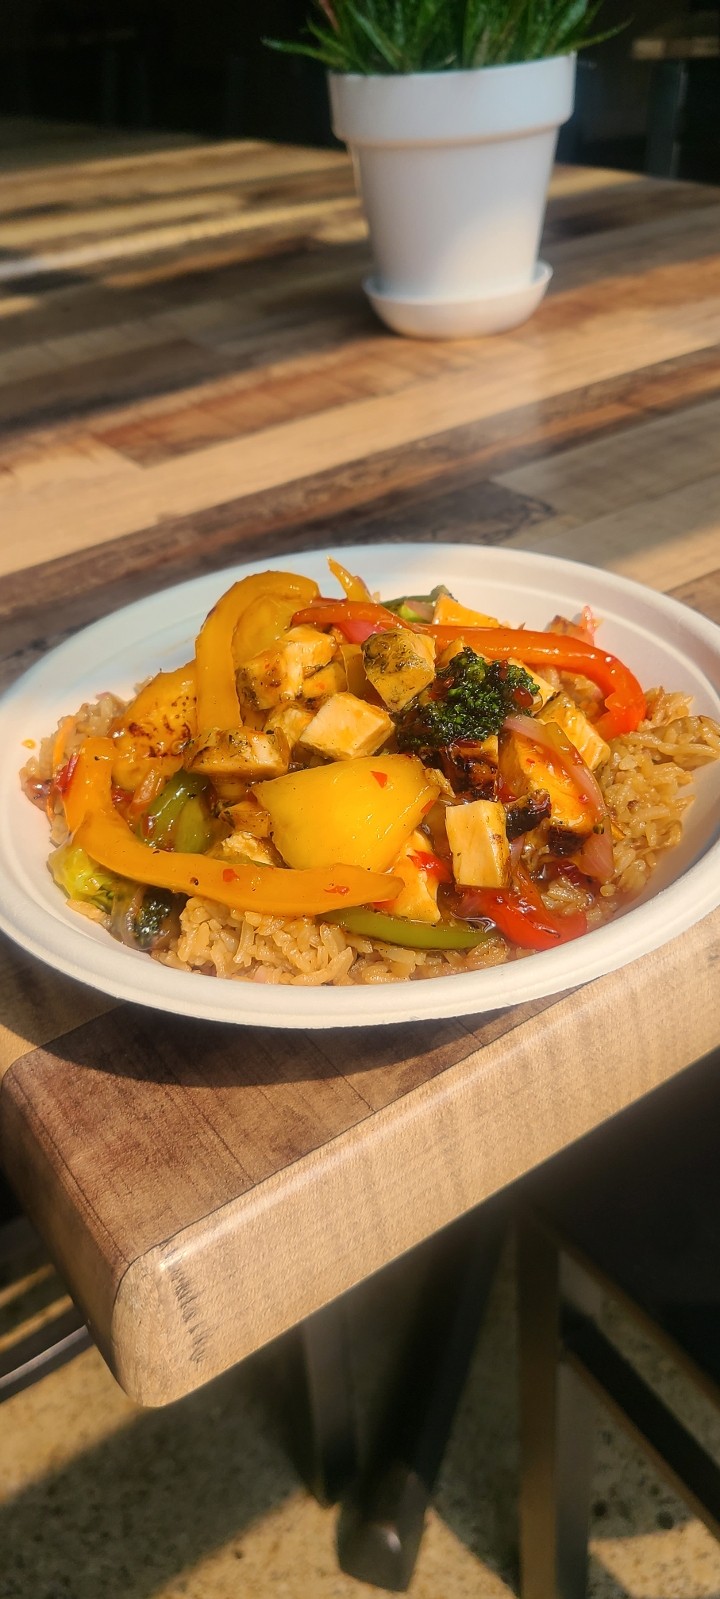 Chicken Stir-Fry with Fried Rice